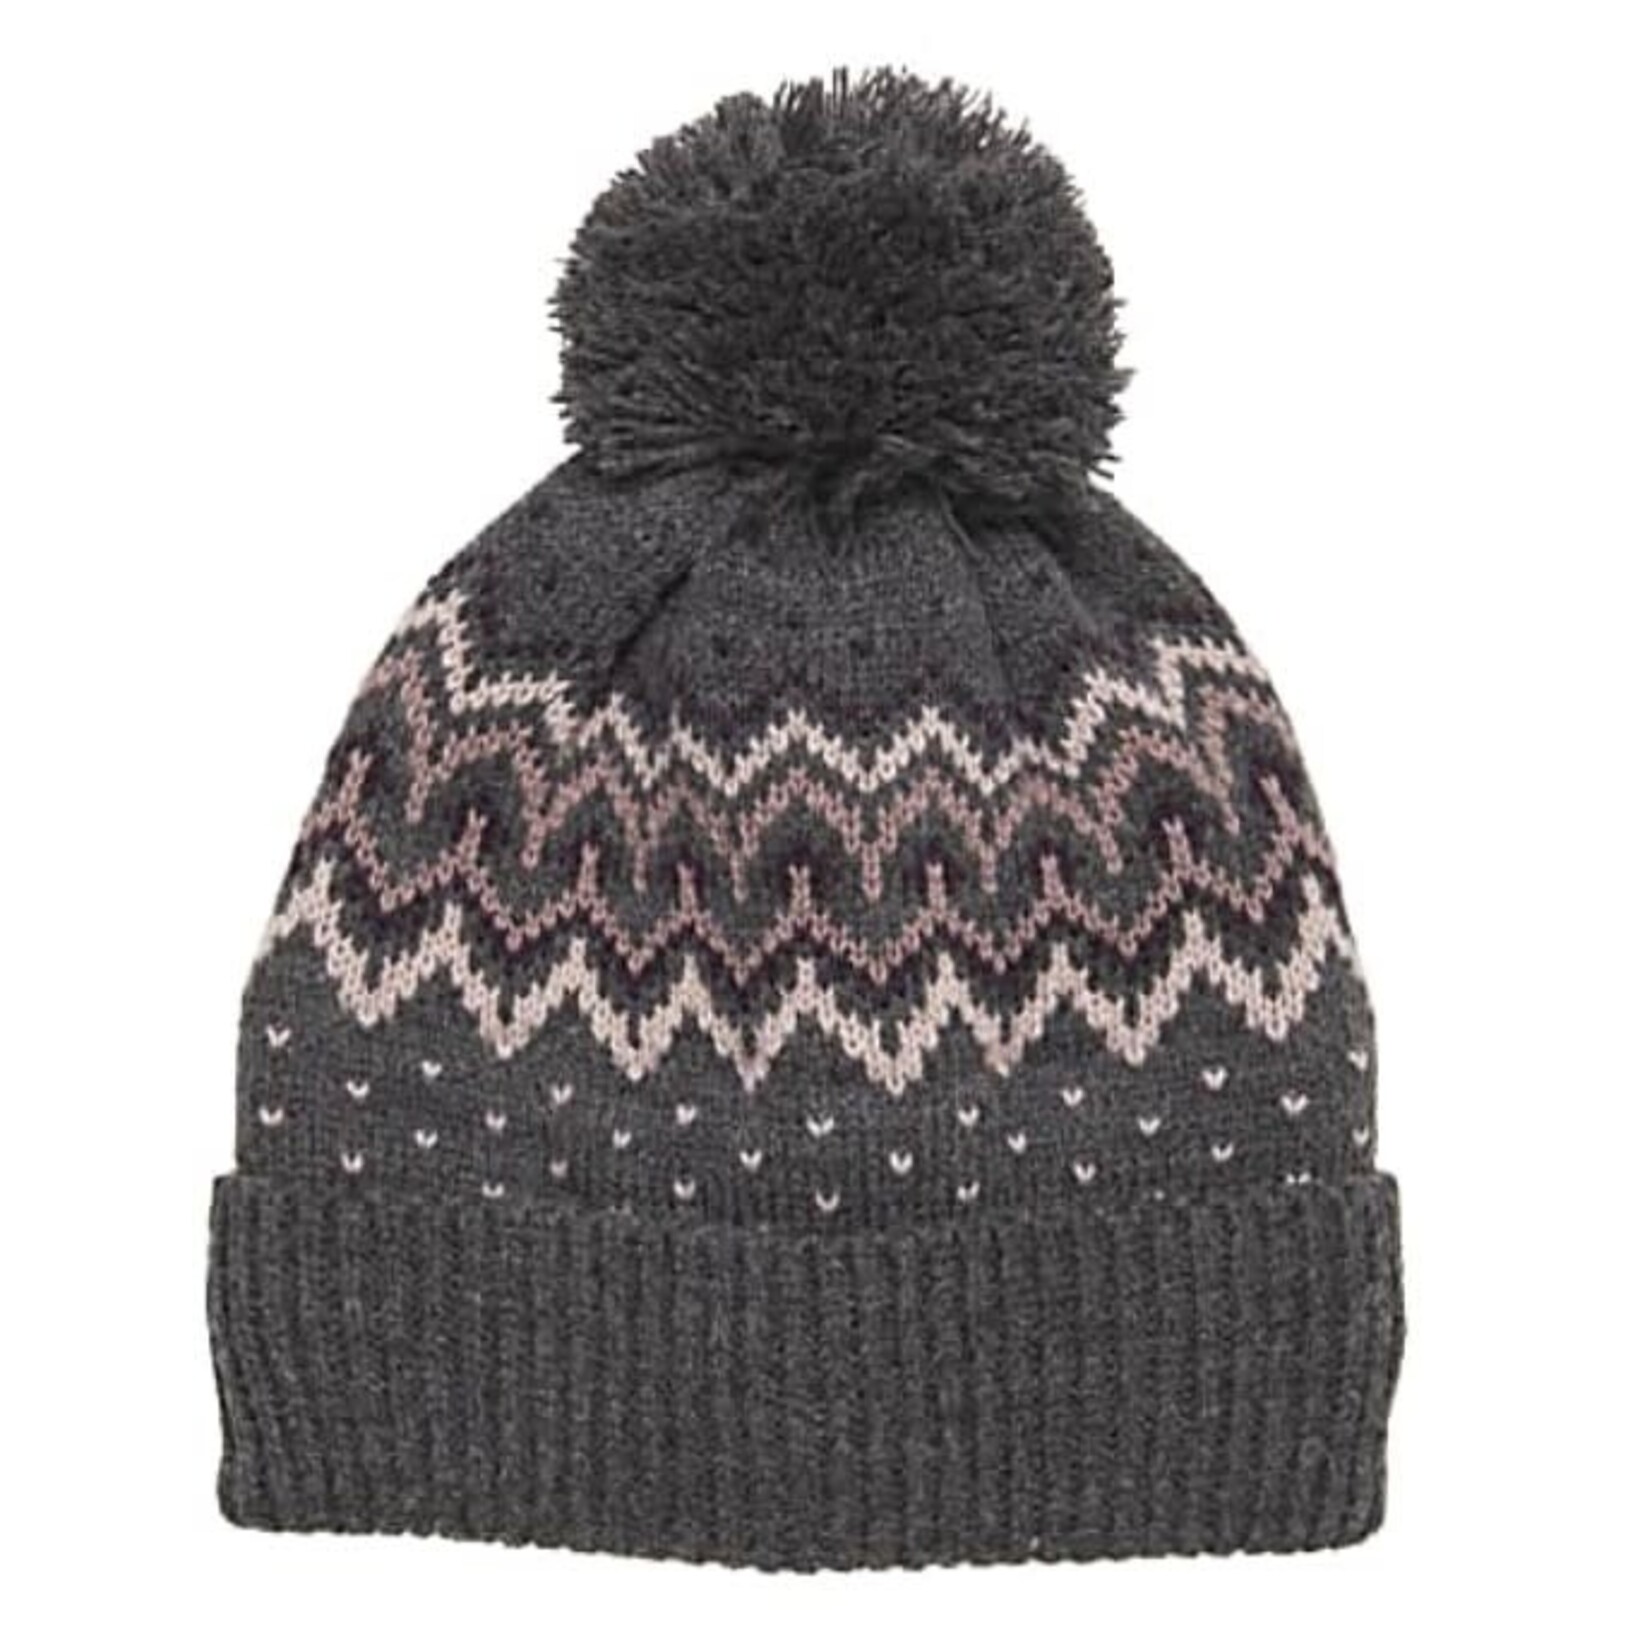 Color Kids COLOR KIDS - Winter knit hat with jacquard design - Charcoal and pink